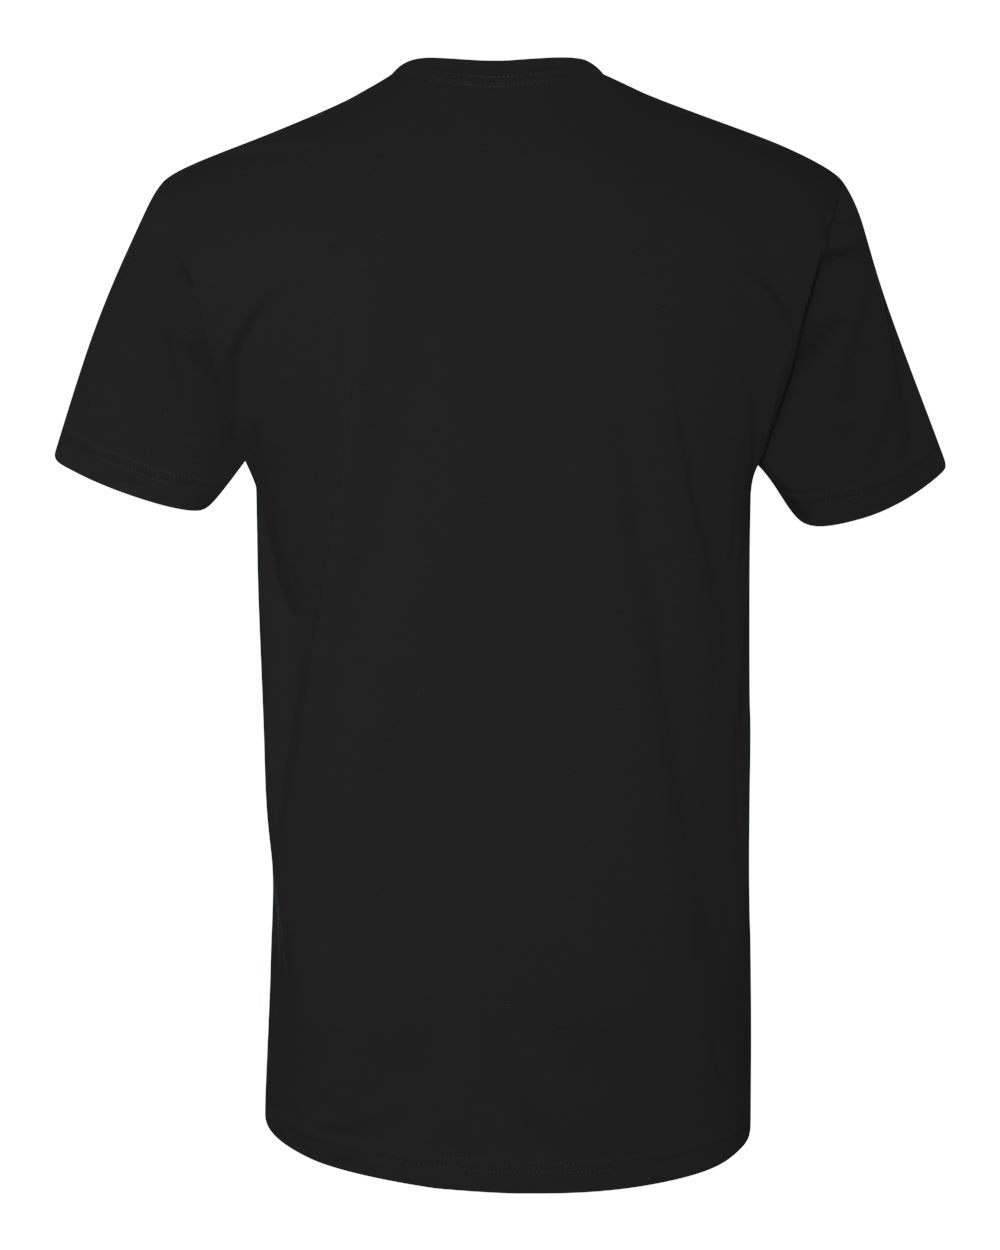 fully customizable next level cotton short sleeve tee shirt in multiple sizes and colors